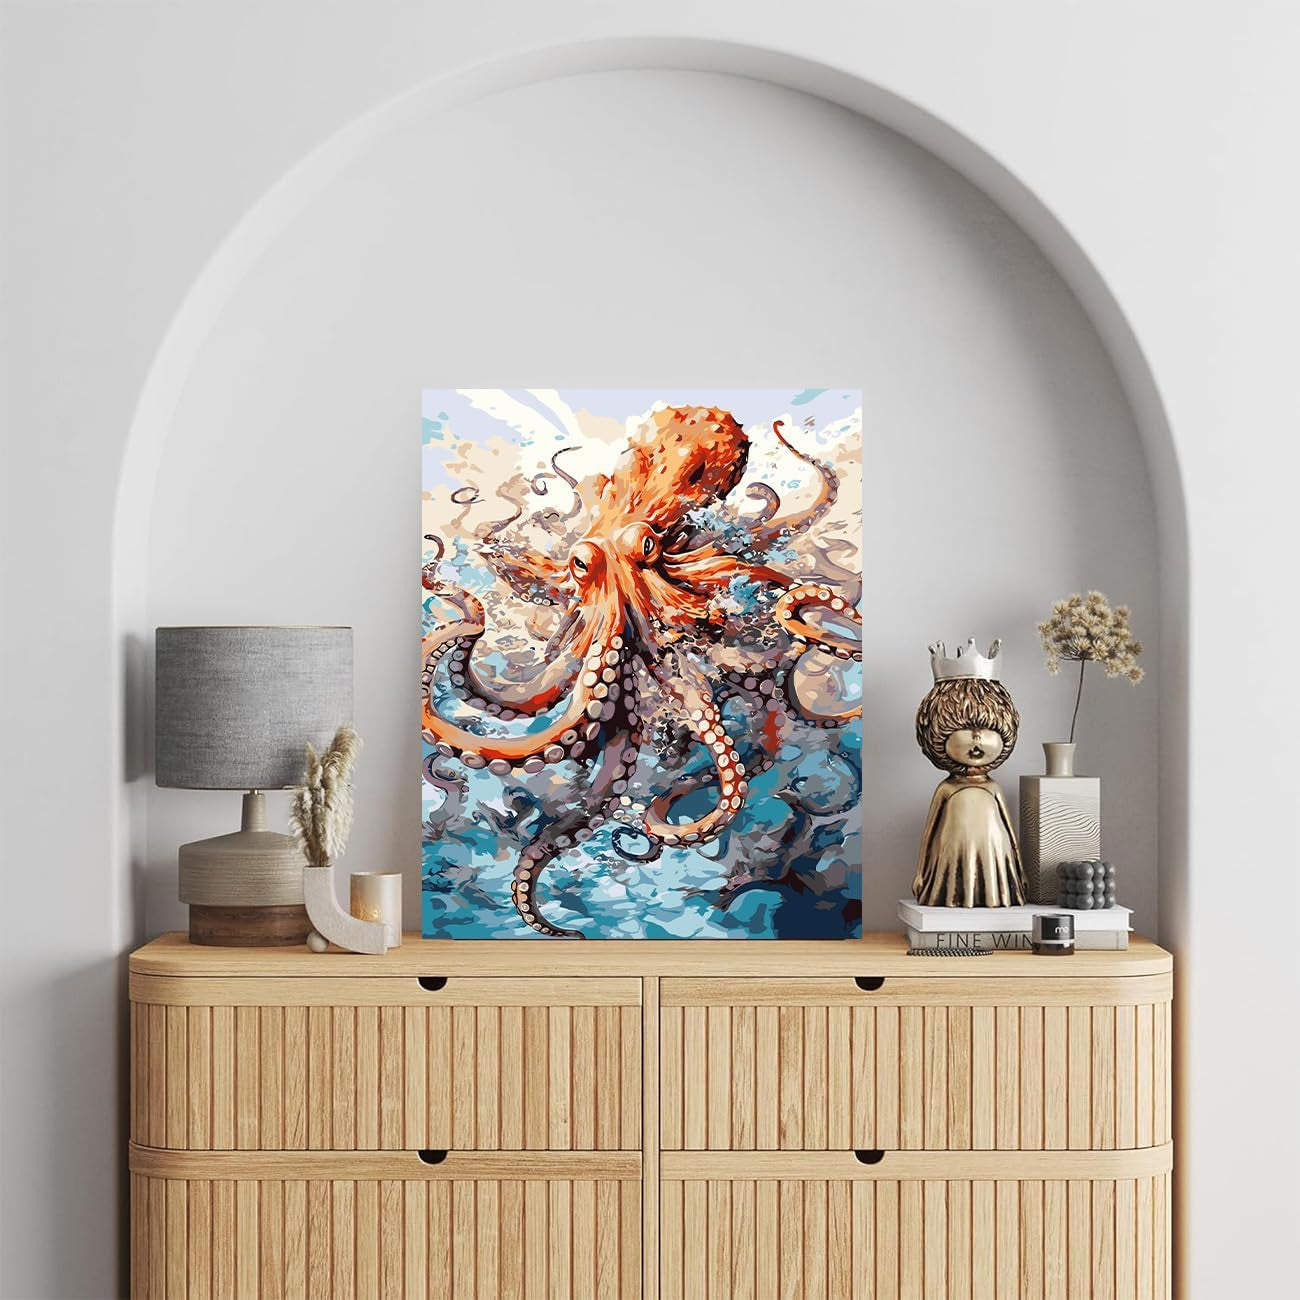 Paint by Numbers Kit for Adults Beginner,Color by Numbers on Canvas Octopus Oil Paingting Kits Drawing DIY Acrylic Arts Craft Kit Gift for Home Decor 16X20 Inch